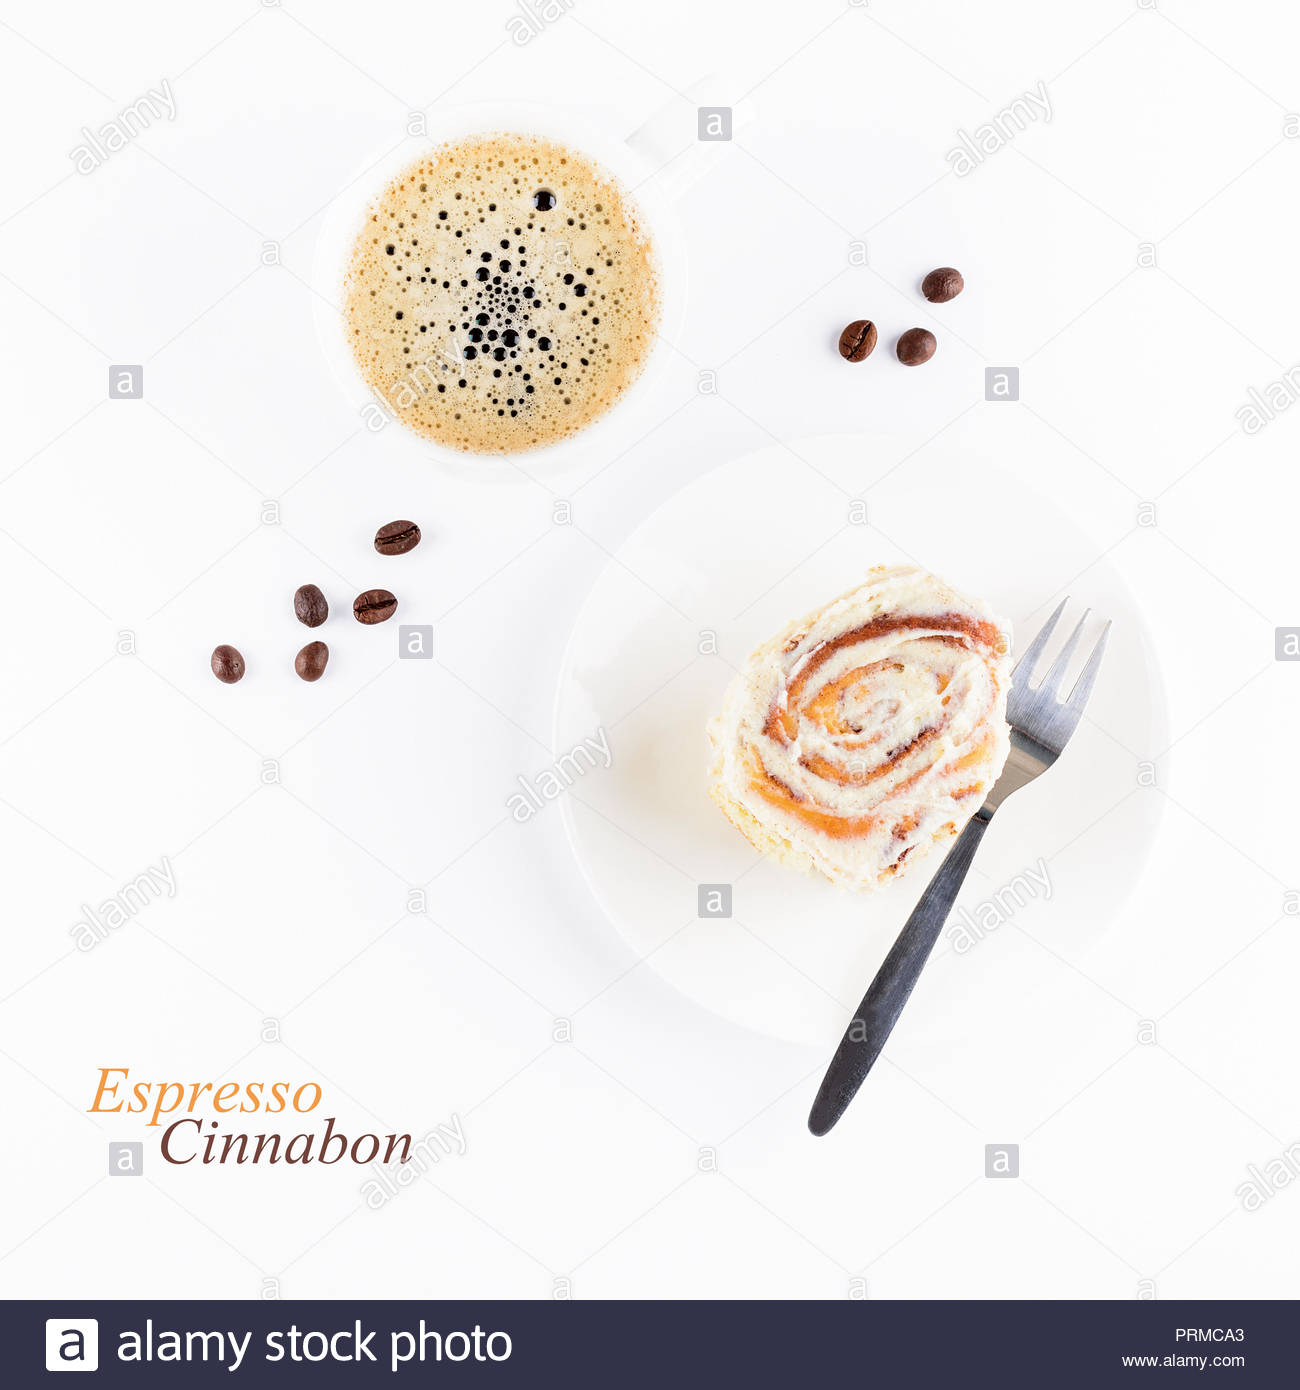 Cup Of Espresso And Fresh Cinnabon Roll With Glaze On White